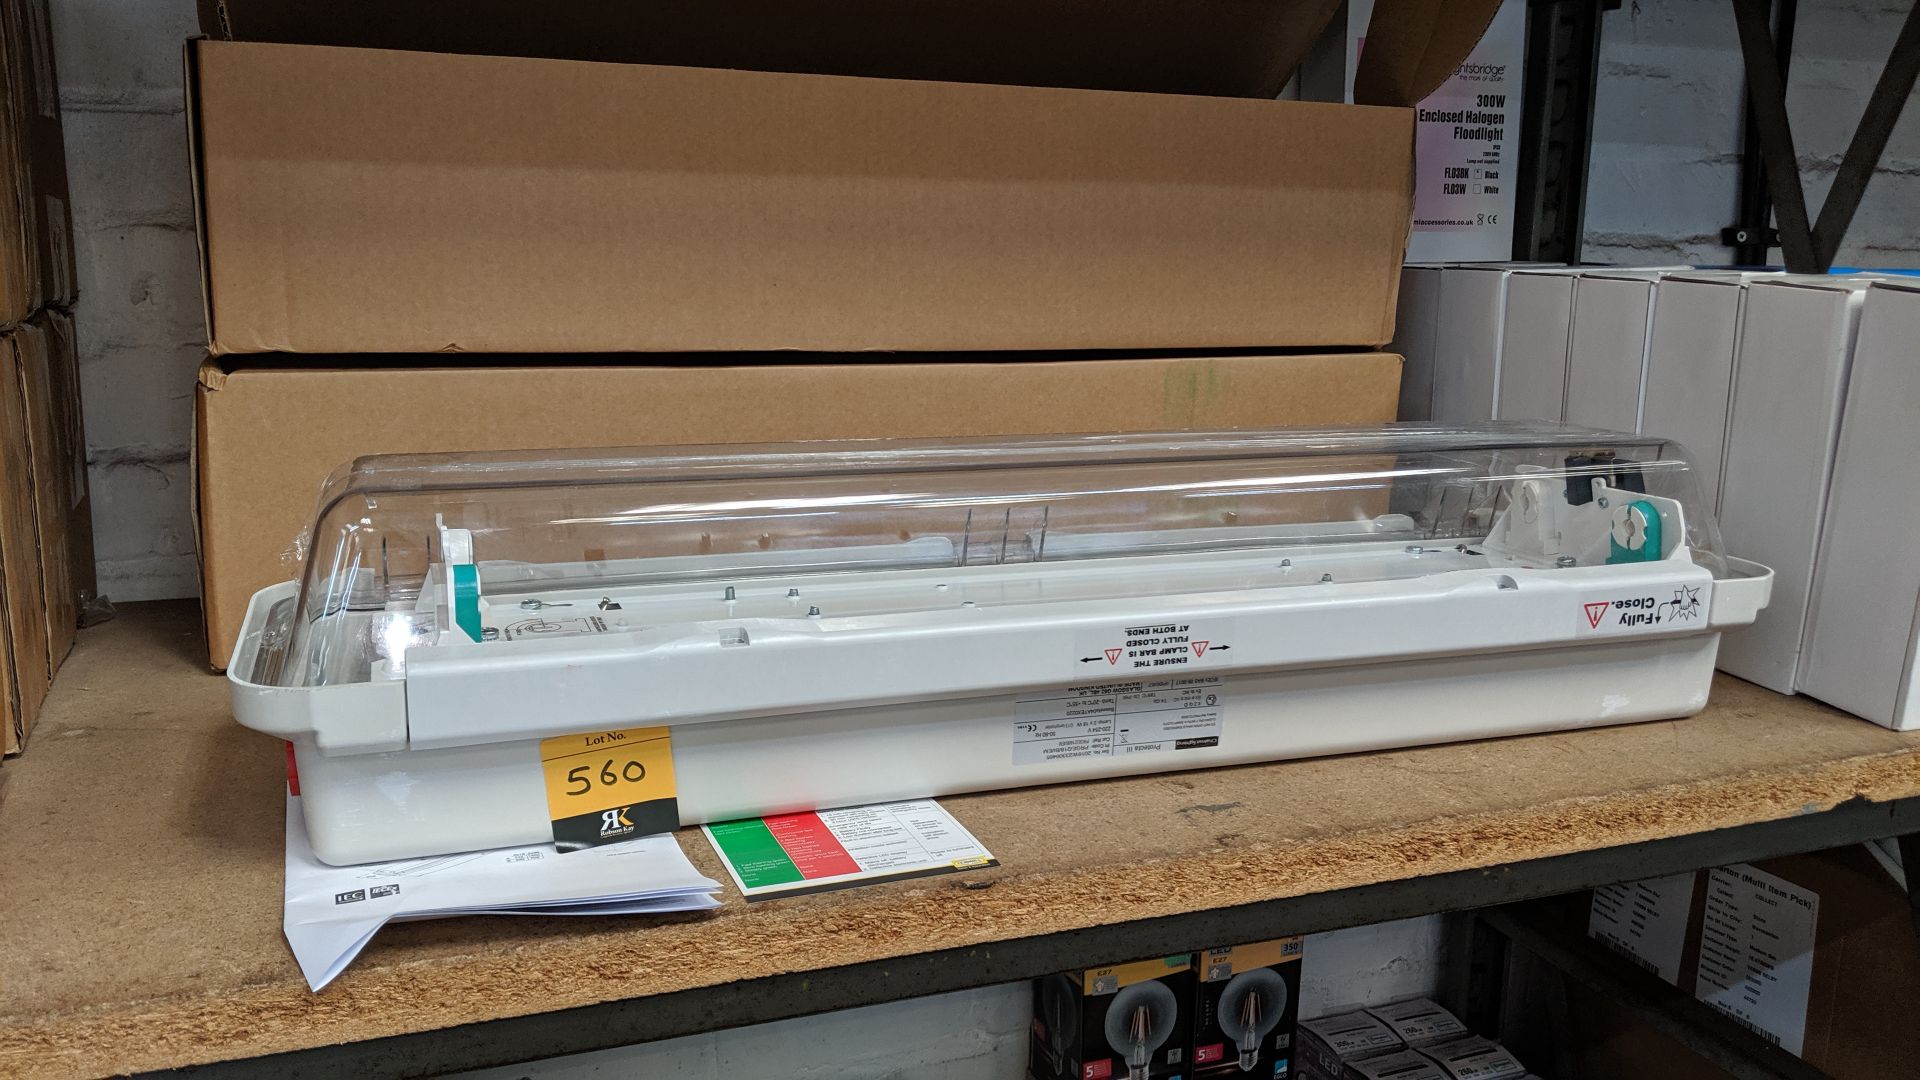 2 off Chalmit Emergency fluorescent lighting units. This is one of a number of lots being sold on